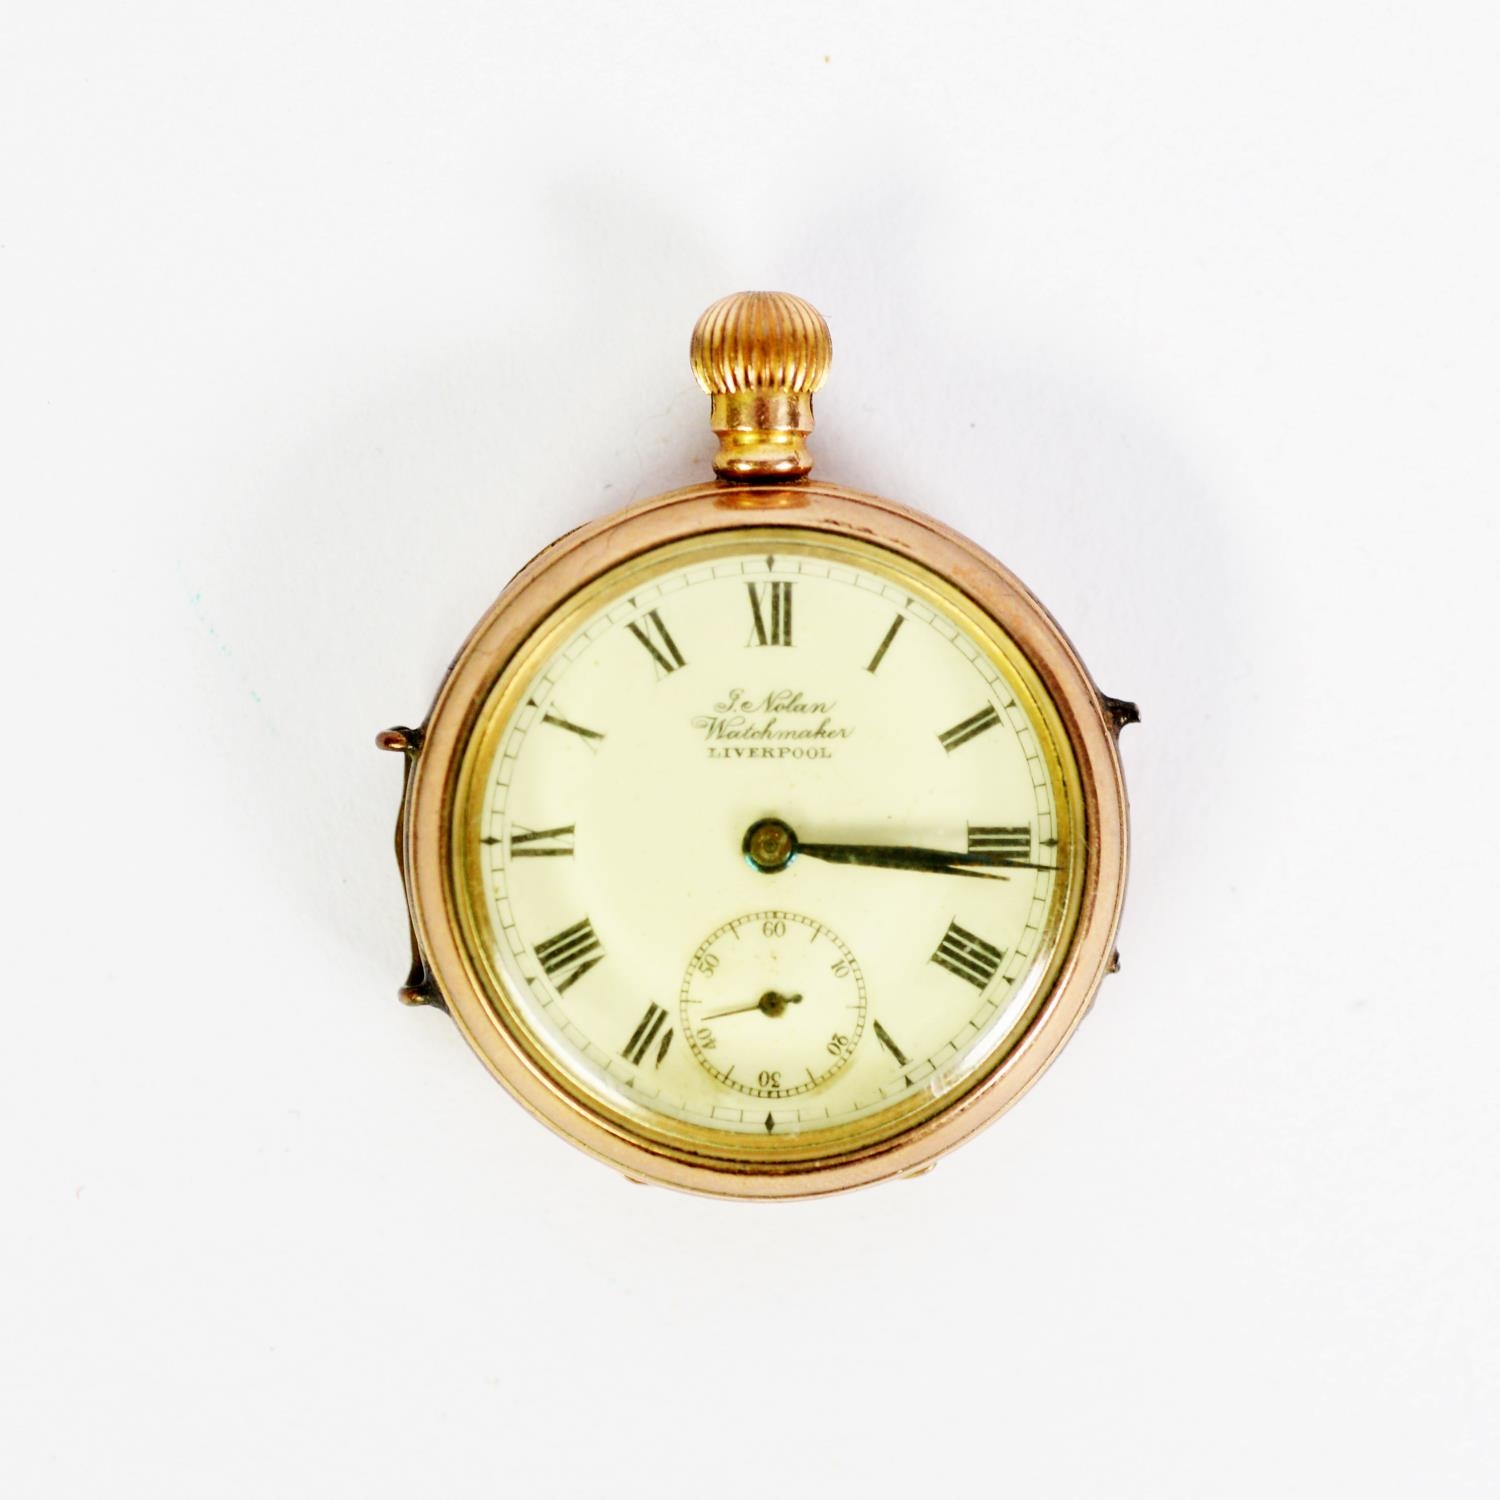 I. NOLAN, WATCHMAKER, LIVERPOOL, ROLLED GOLD WRISTWATCH with Swiss movement, (marked US. pat. 24 May